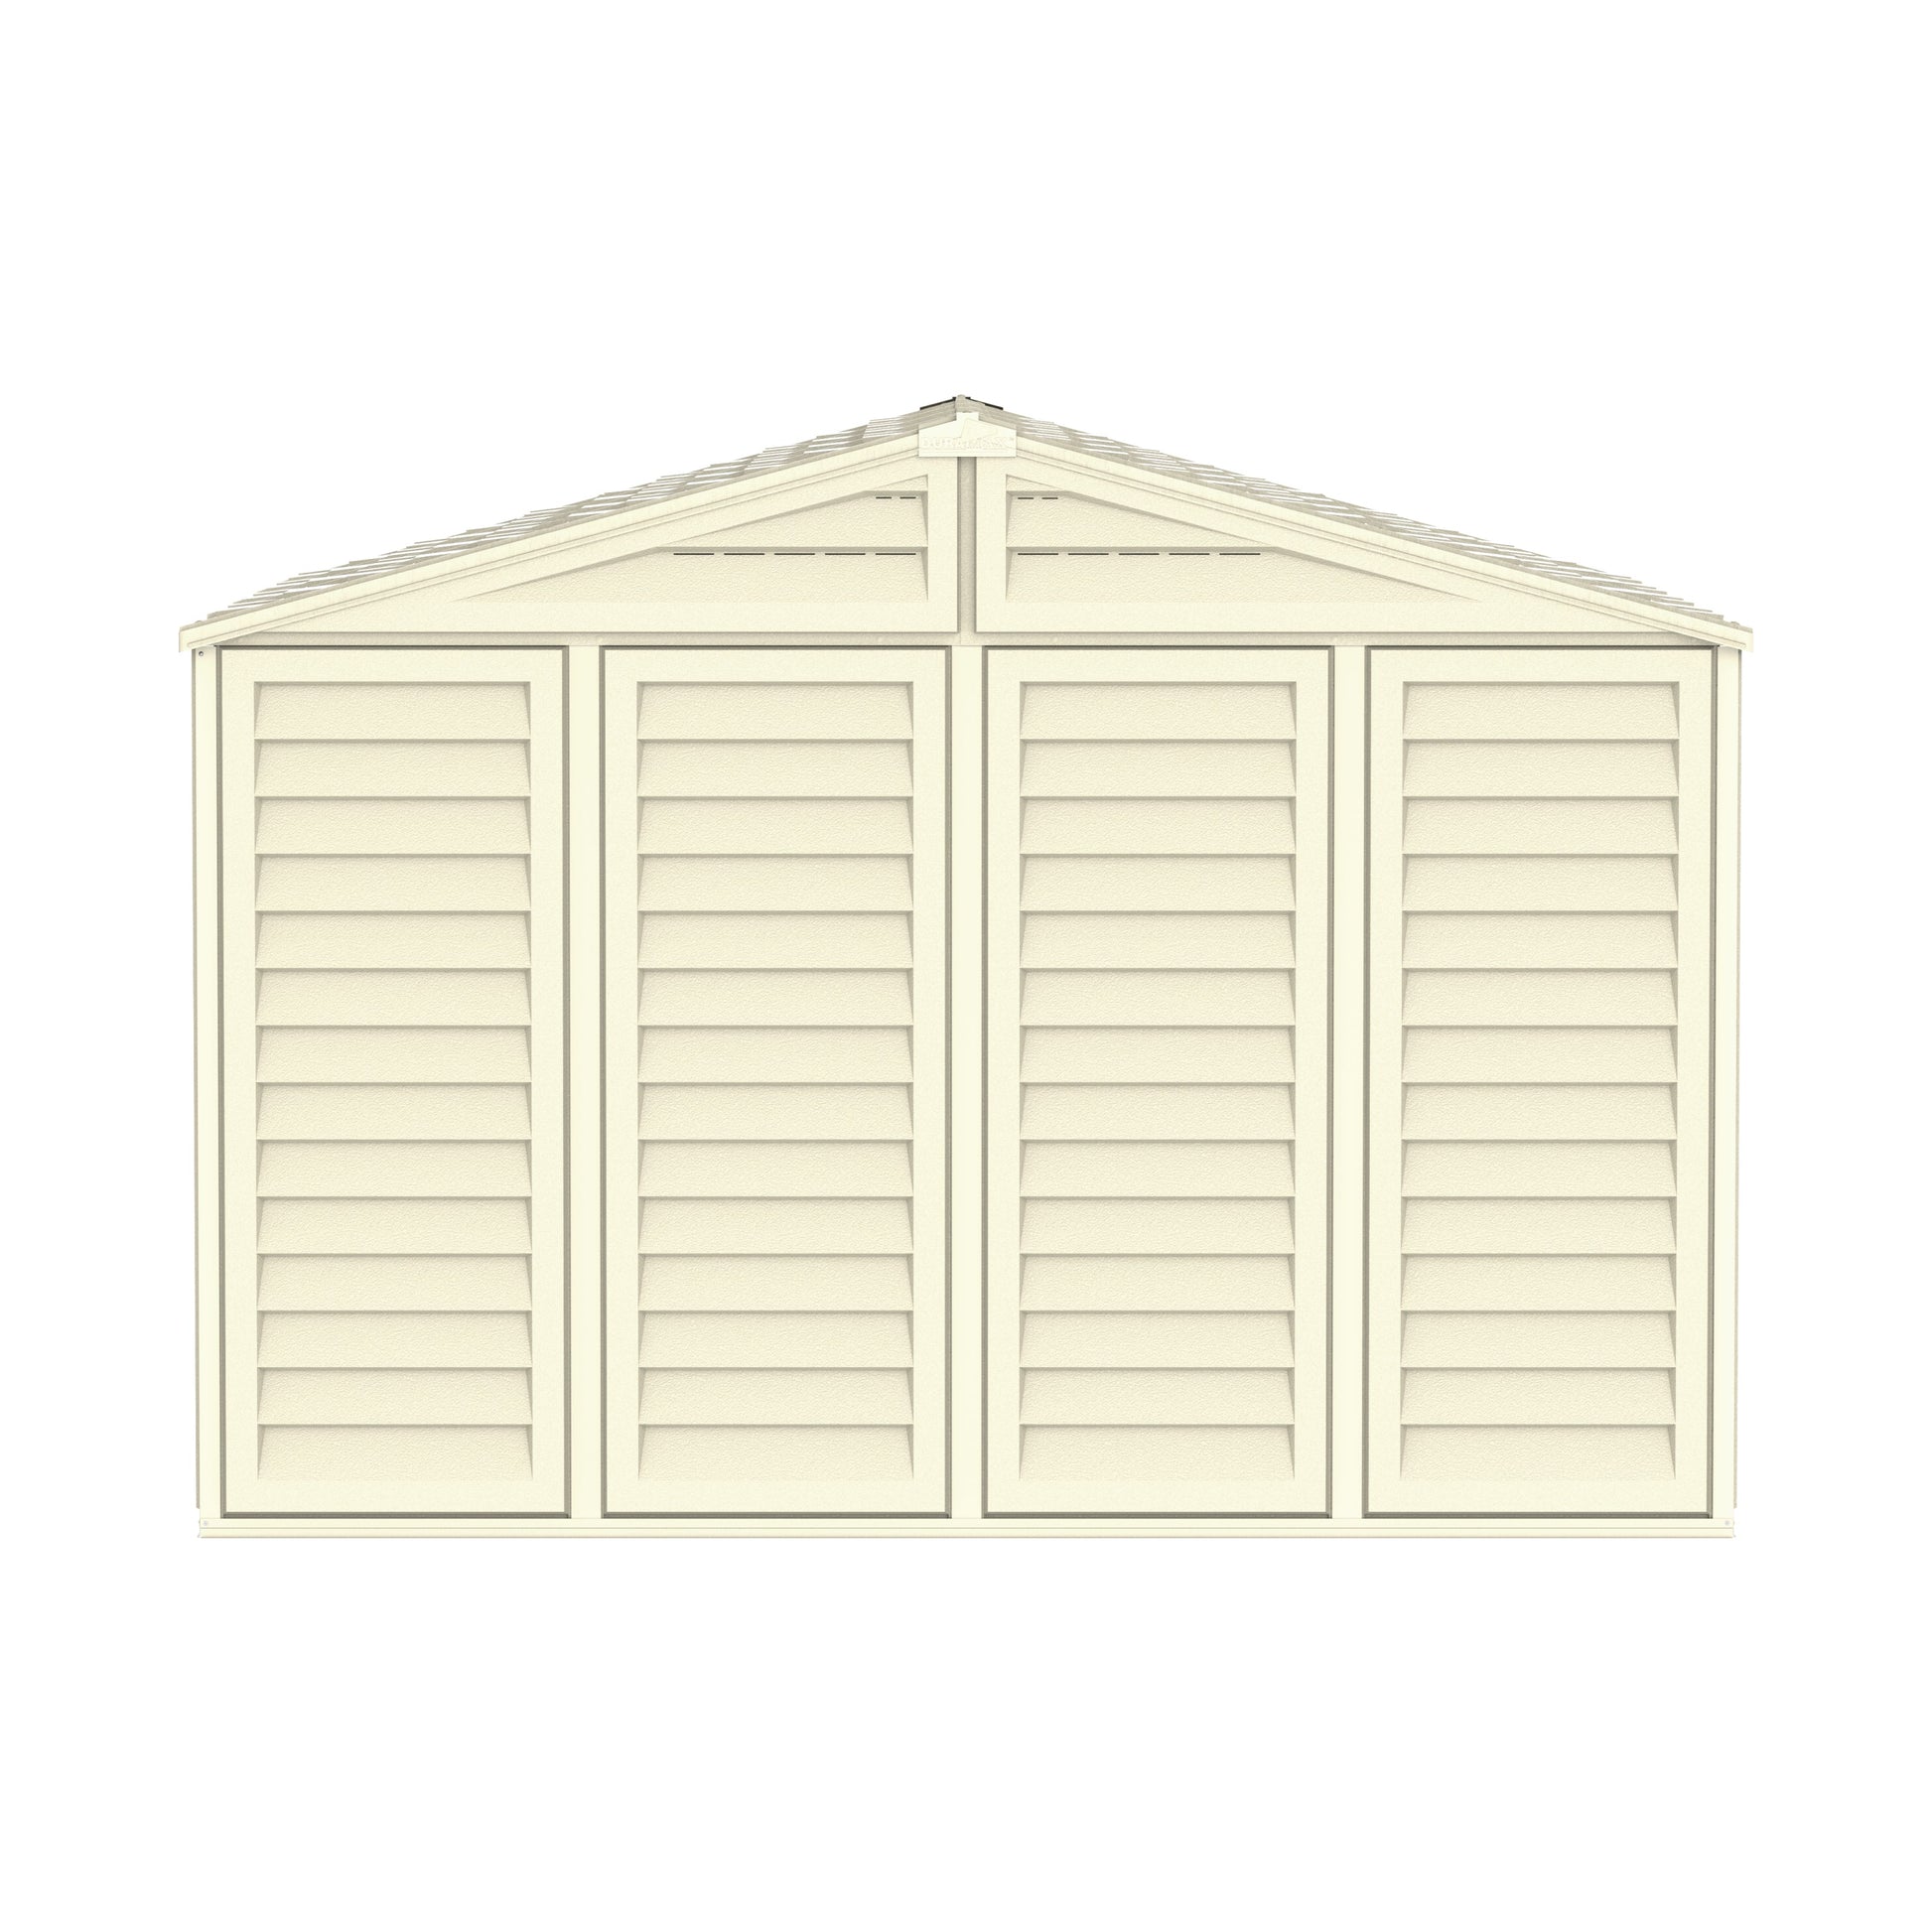 Outdoor Storage Shed 10.5x10ft- Cosmoplast Oman